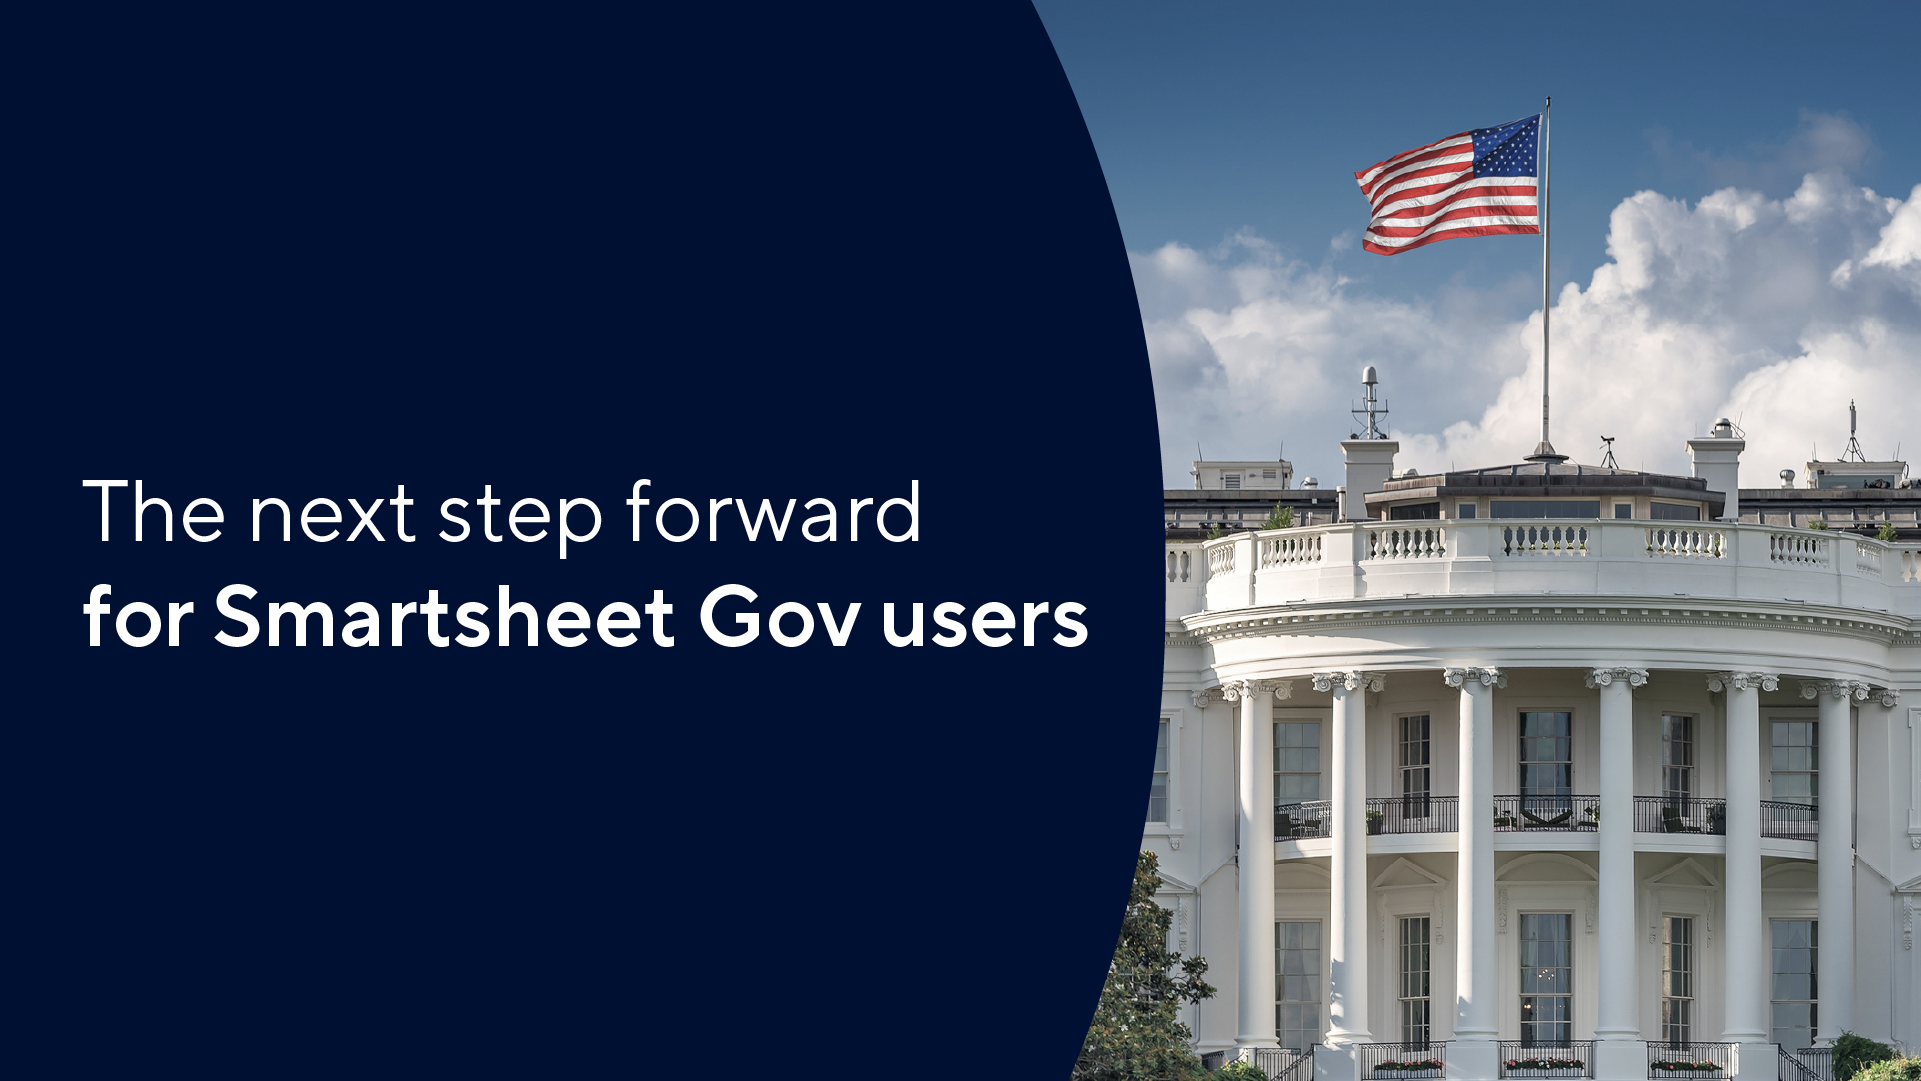 The next step forward for Smartsheet Gov users